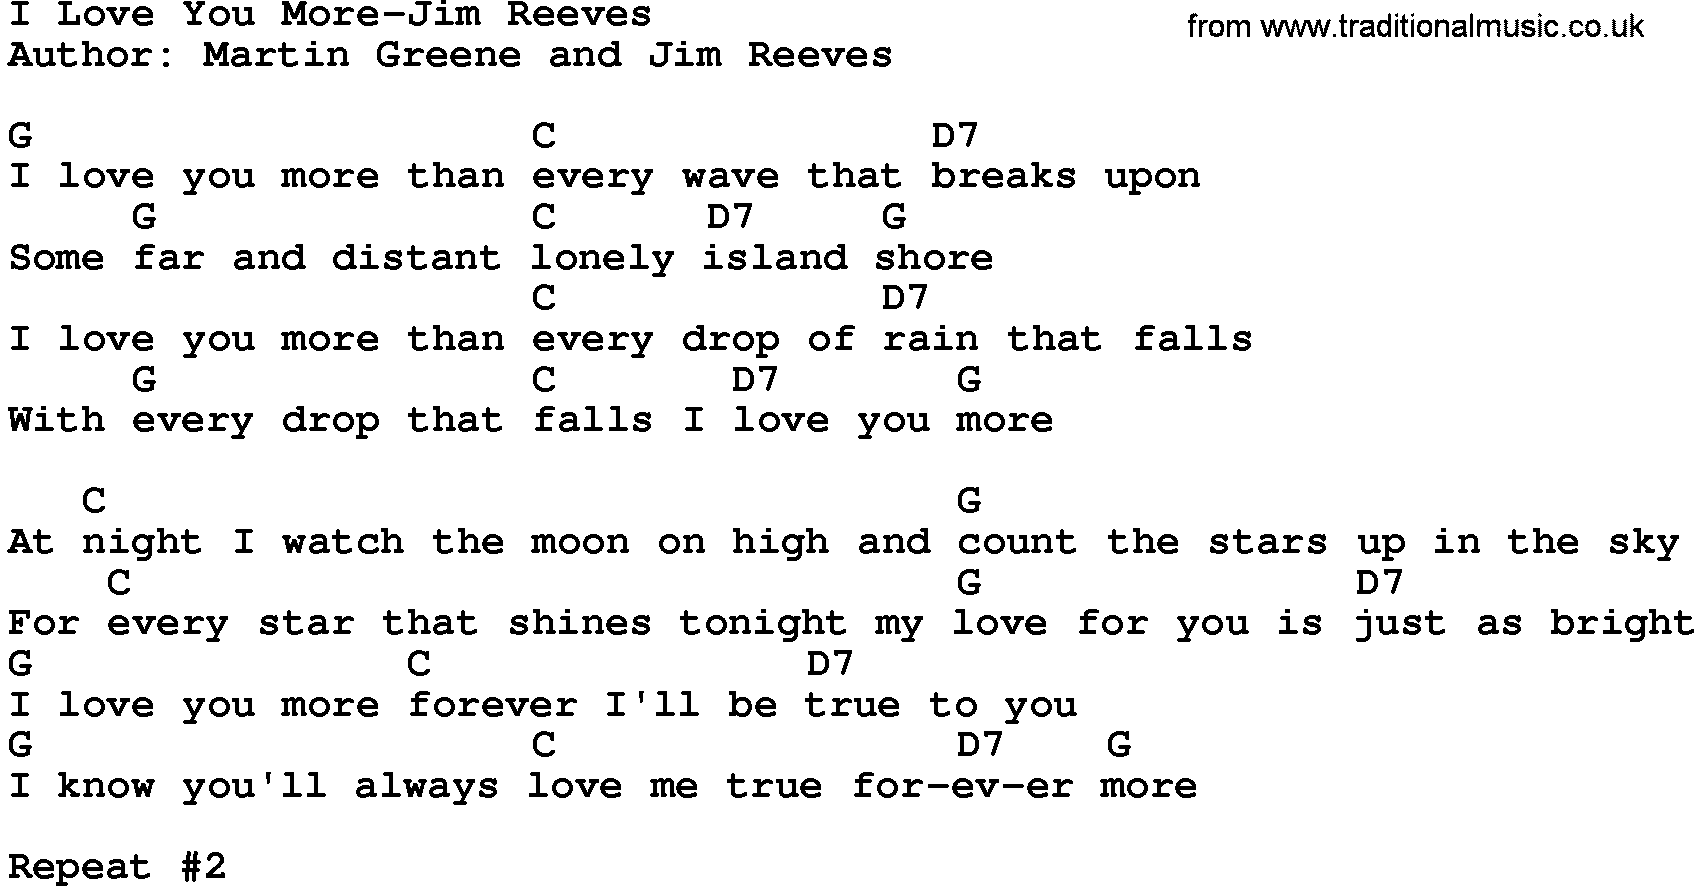 Country music song: I Love You More-Jim Reeves lyrics and chords